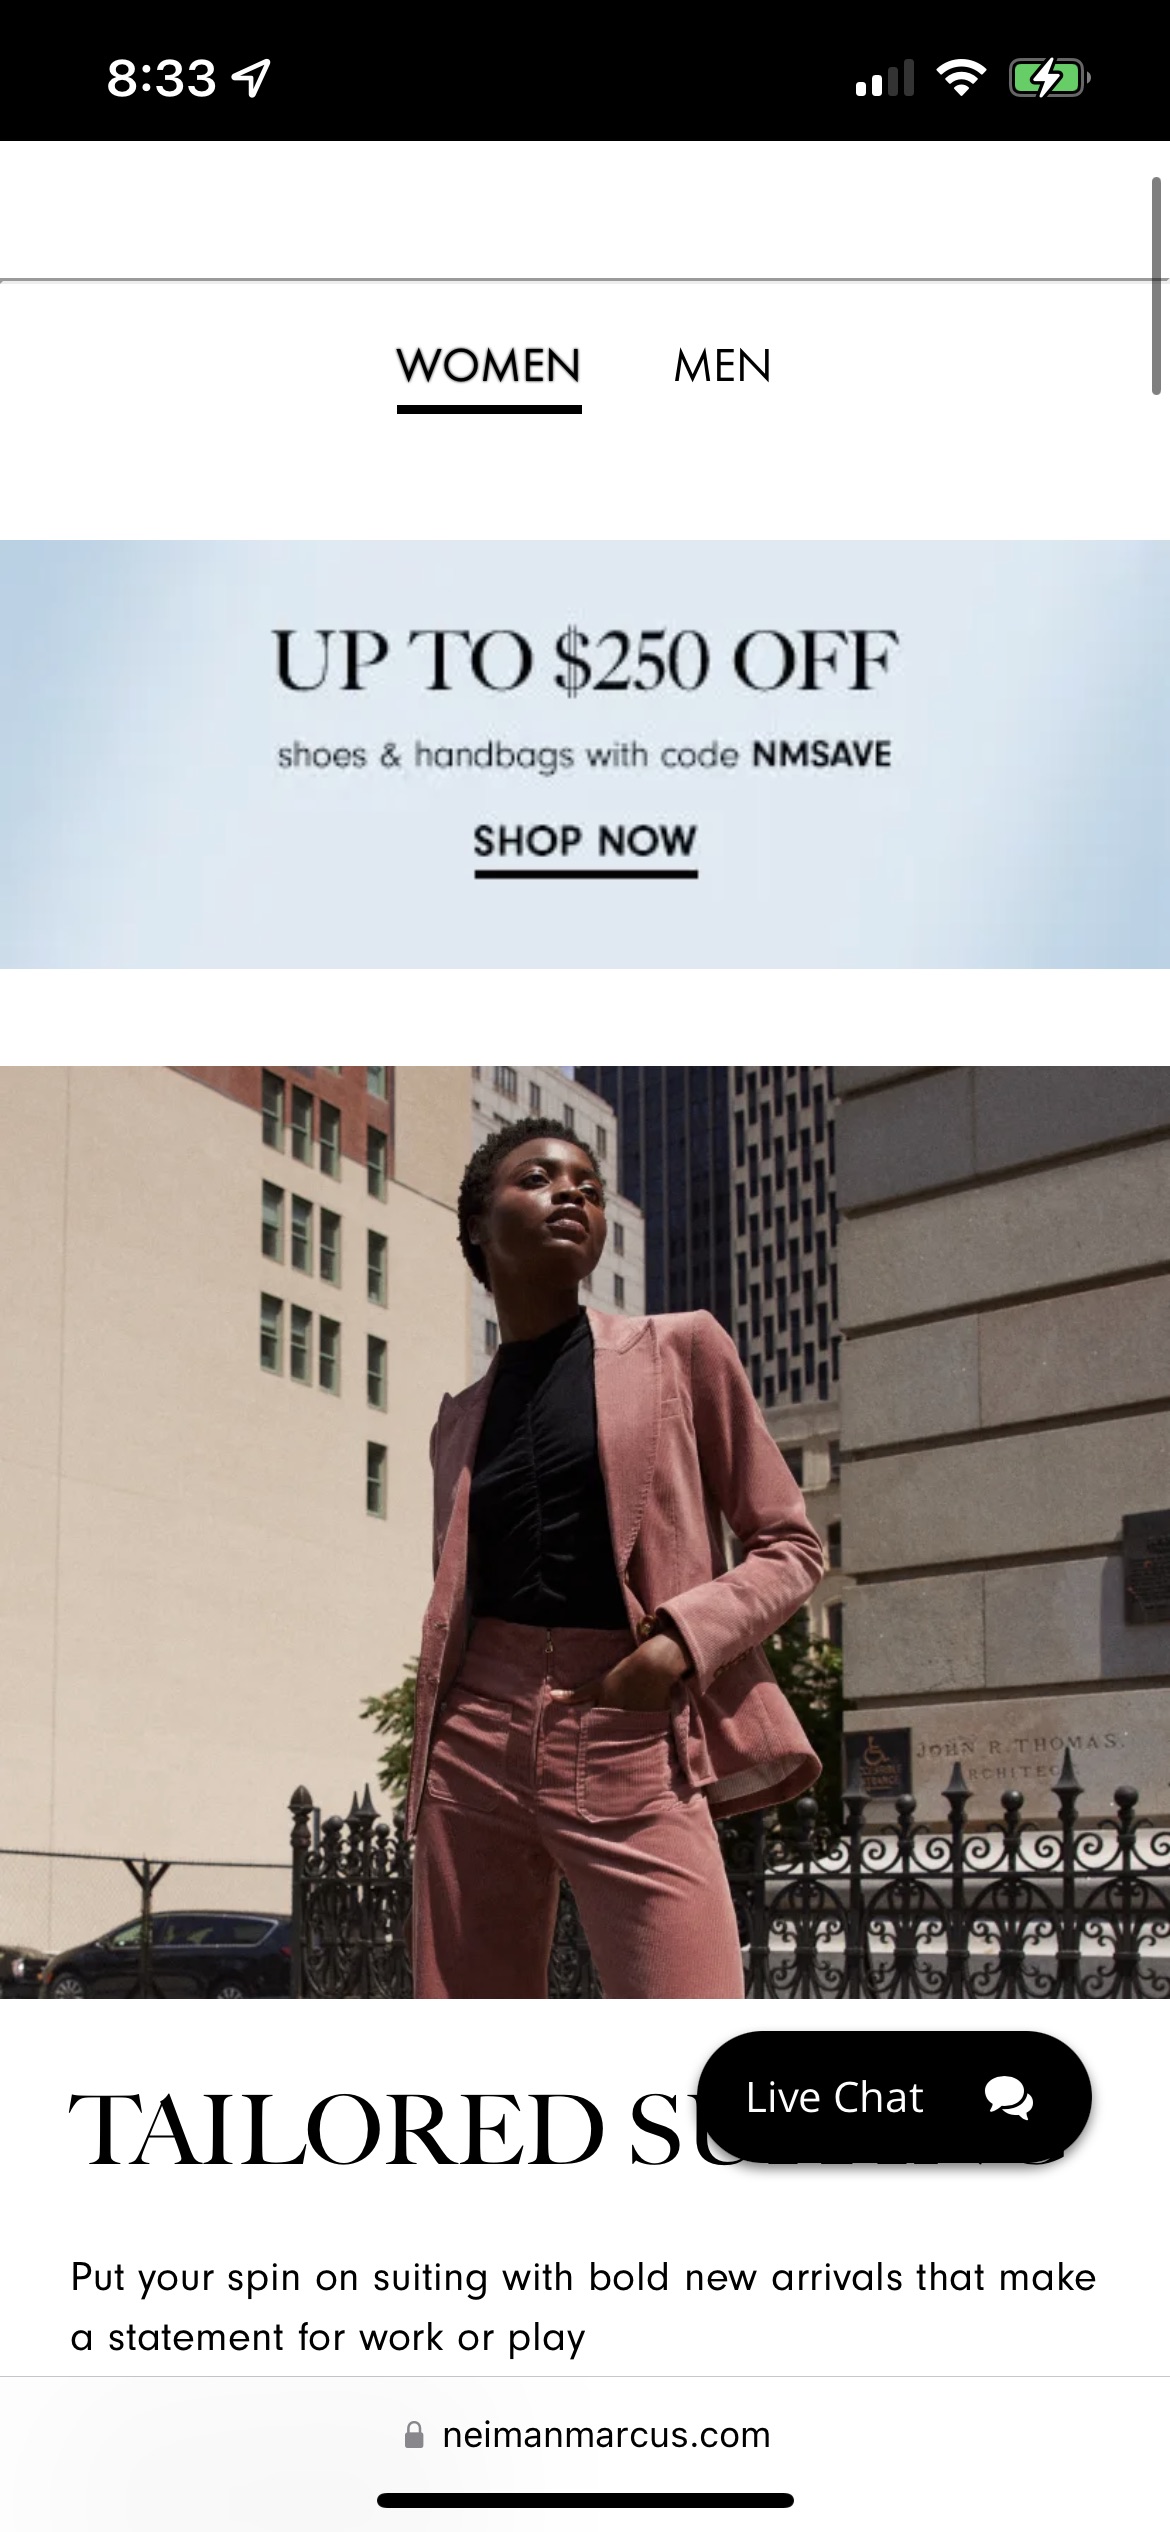 Up to $250 Off shoes & handbags with code NMSAVE